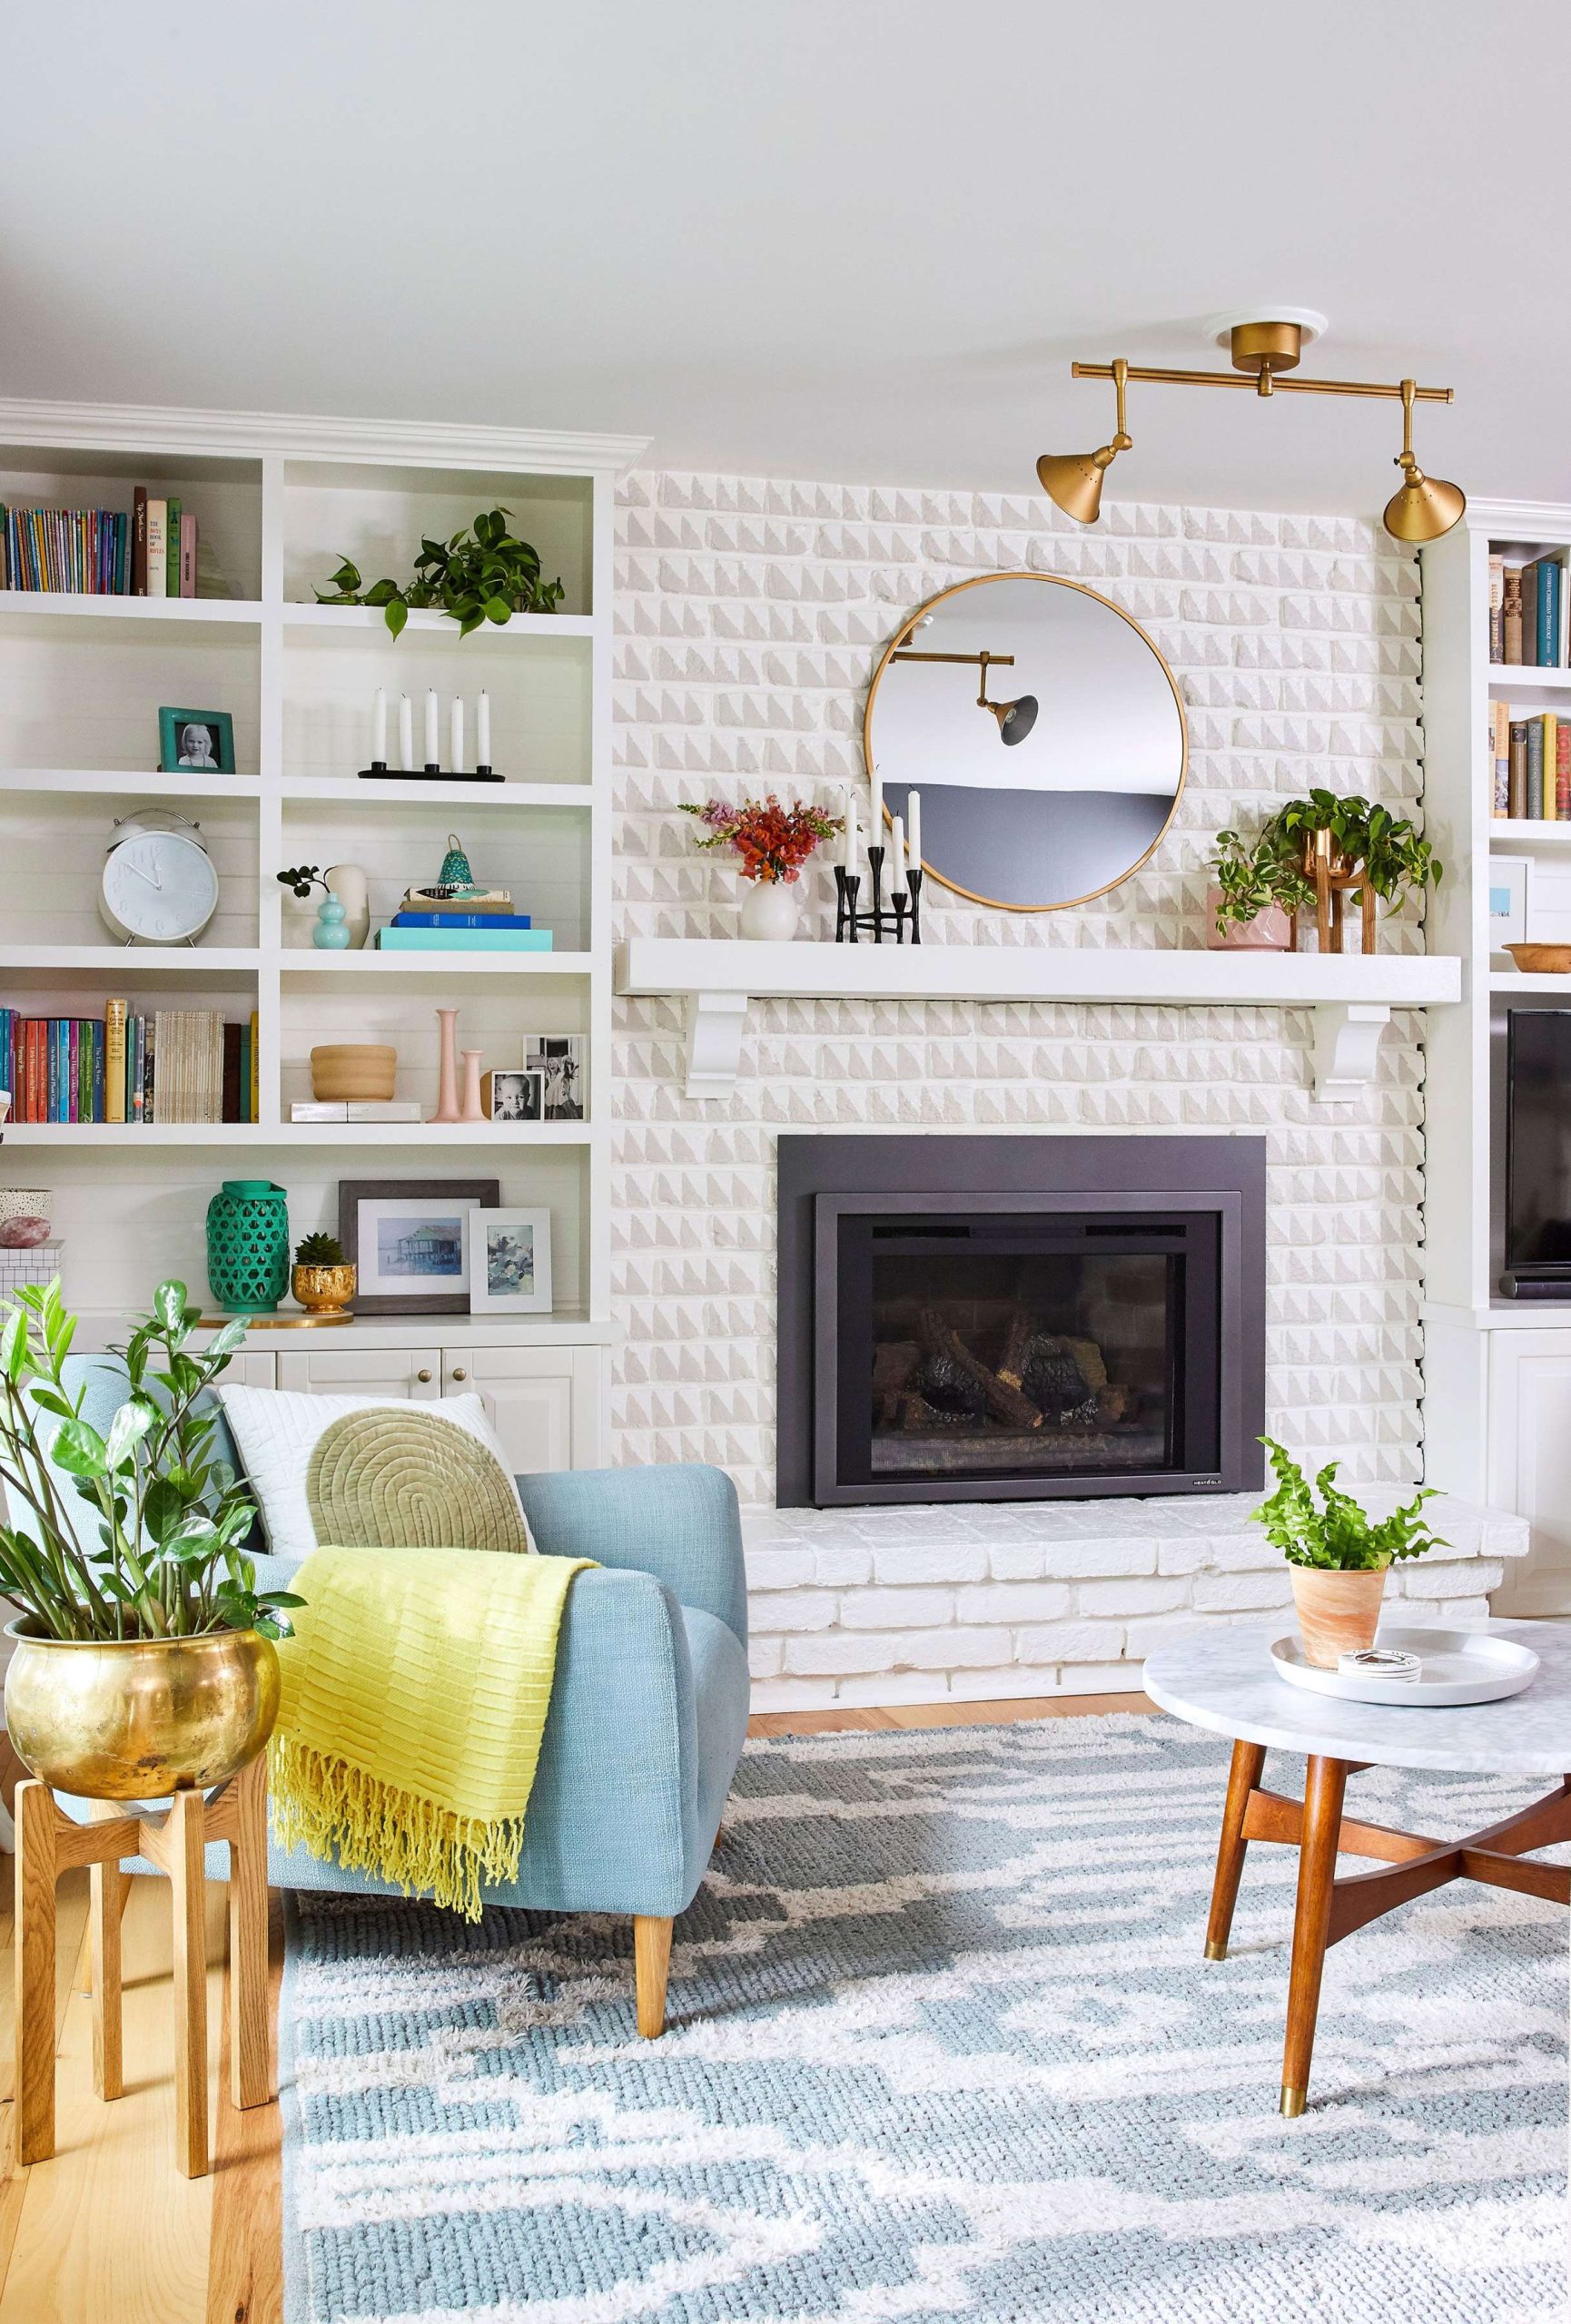 Mantel Decor Ideas That Make Your Fireplace a Focal Point